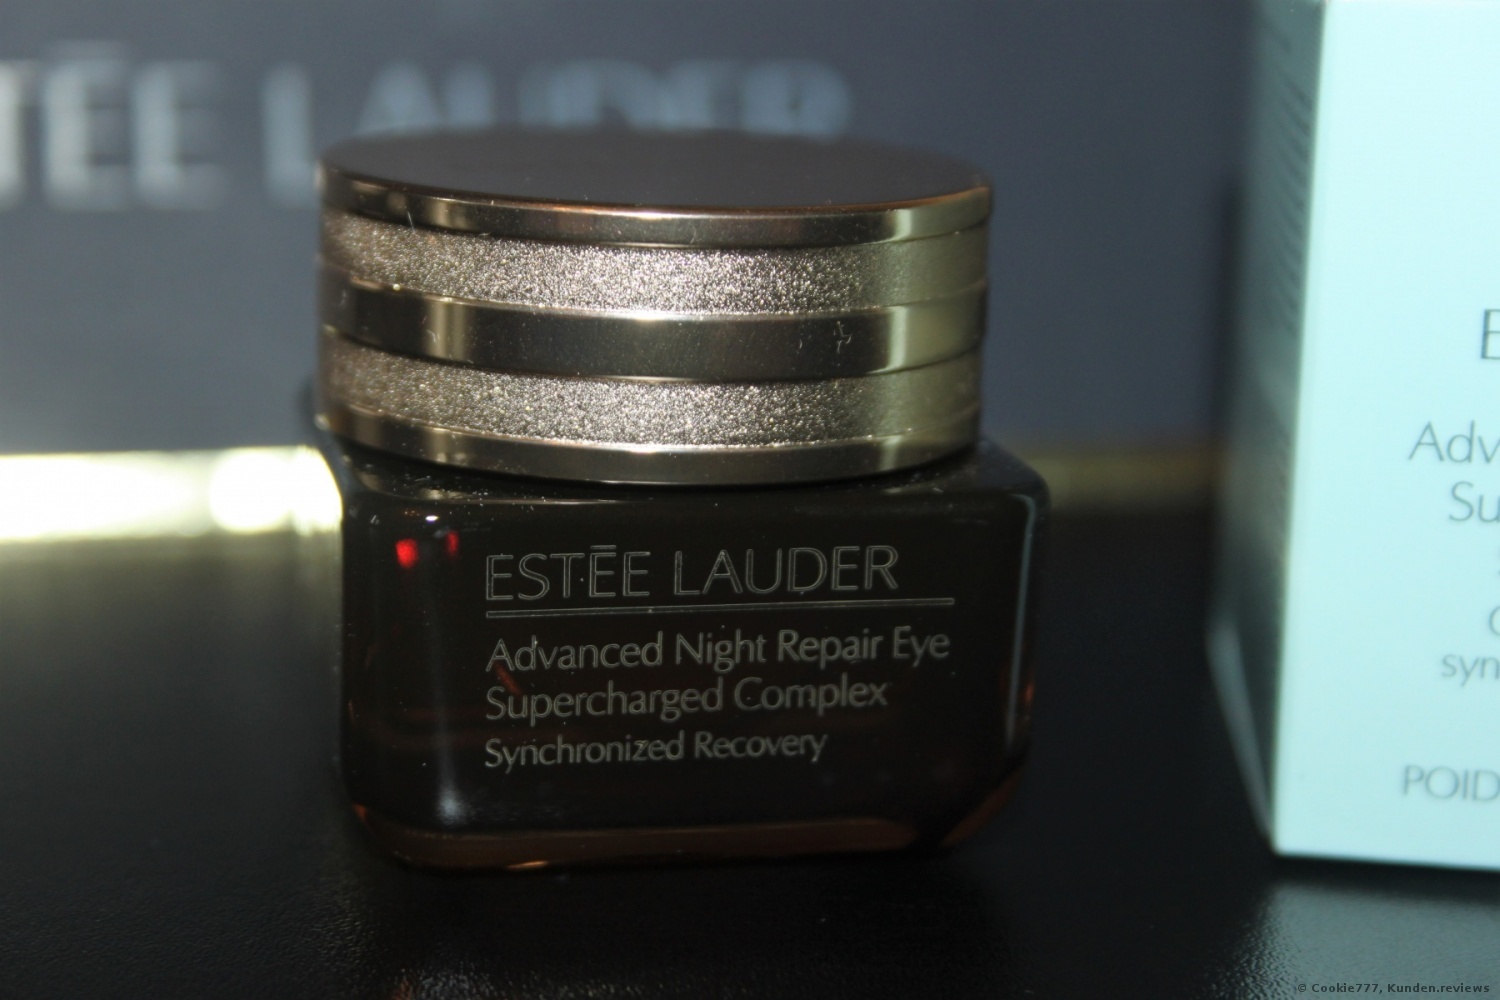 Estee Lauder Advanced Night Repair Eye Supercharged Complex Synchronized Recovery Augencreme Foto